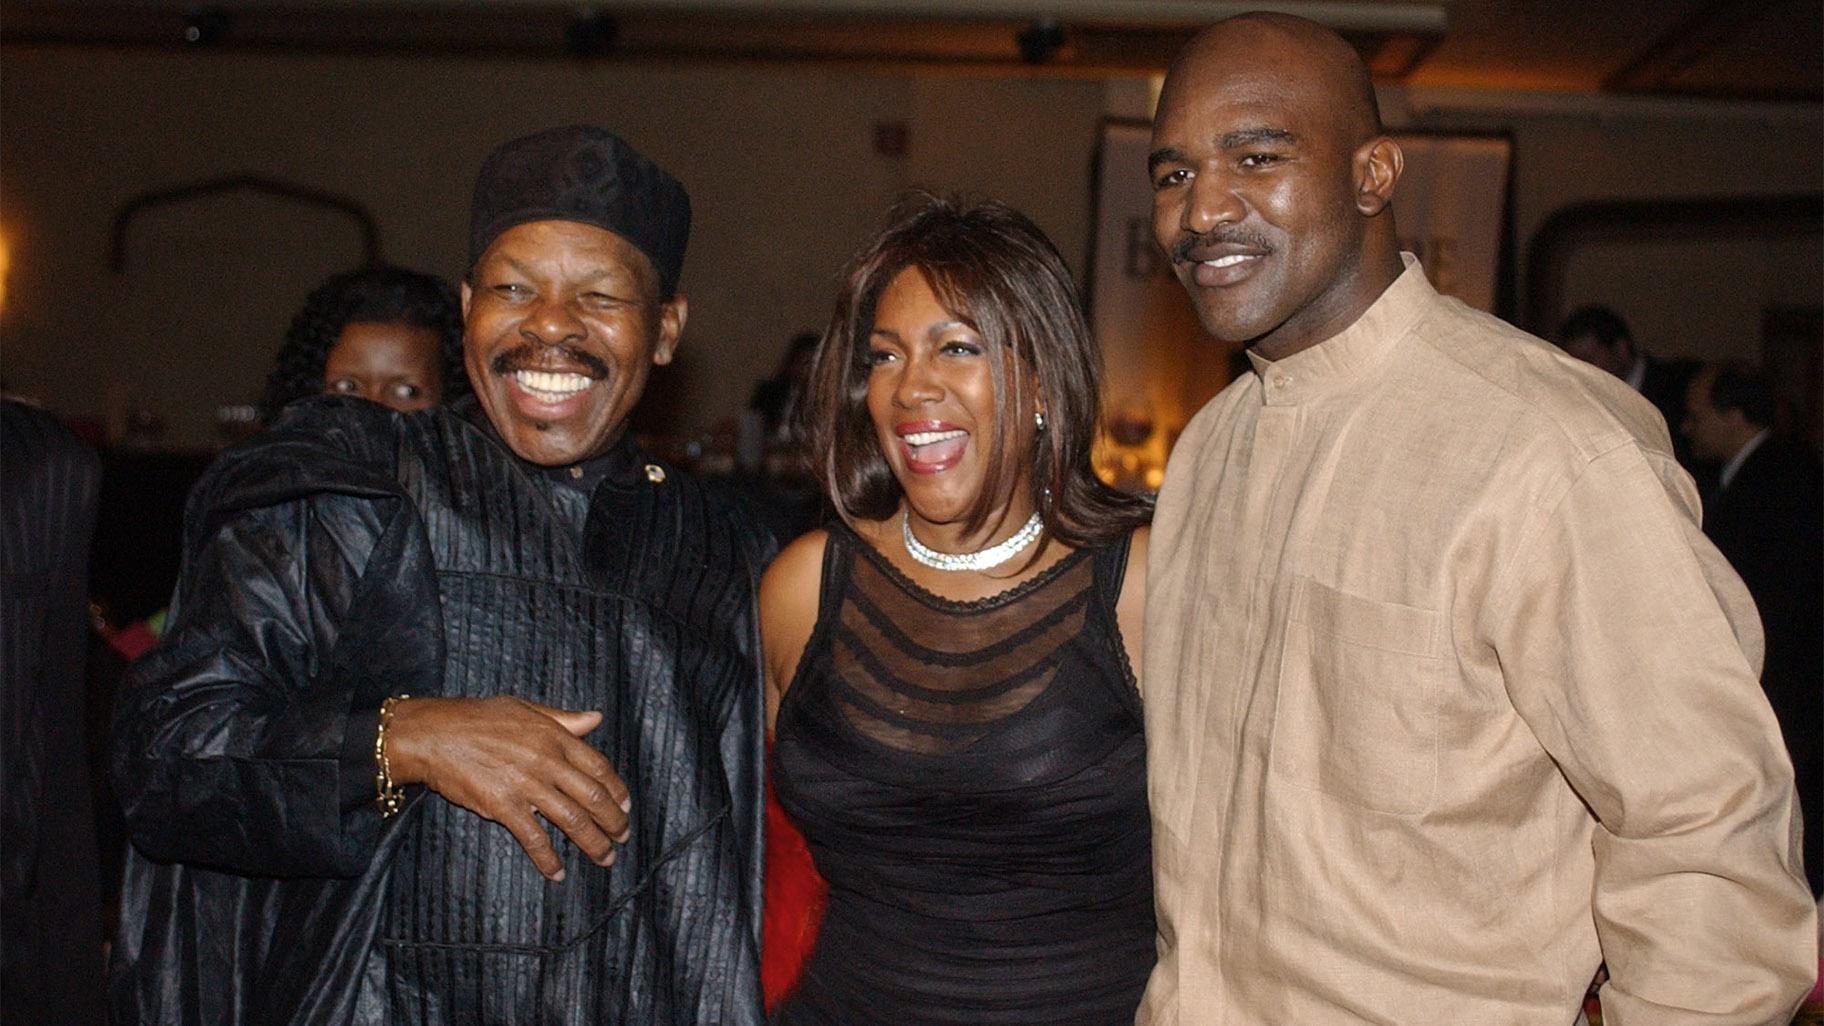 FILE - In this Feb. 20, 2003 file photo, Lloyd Price, left, and Mary Wilson, of the Supremes, pose for a photograph with boxer Evander Holyfield during the reception of the 13th Annual Pioneer Awards presented by the Rhythm & Blues Foundation in New York. (AP Photo / Frank Franklin II, File)